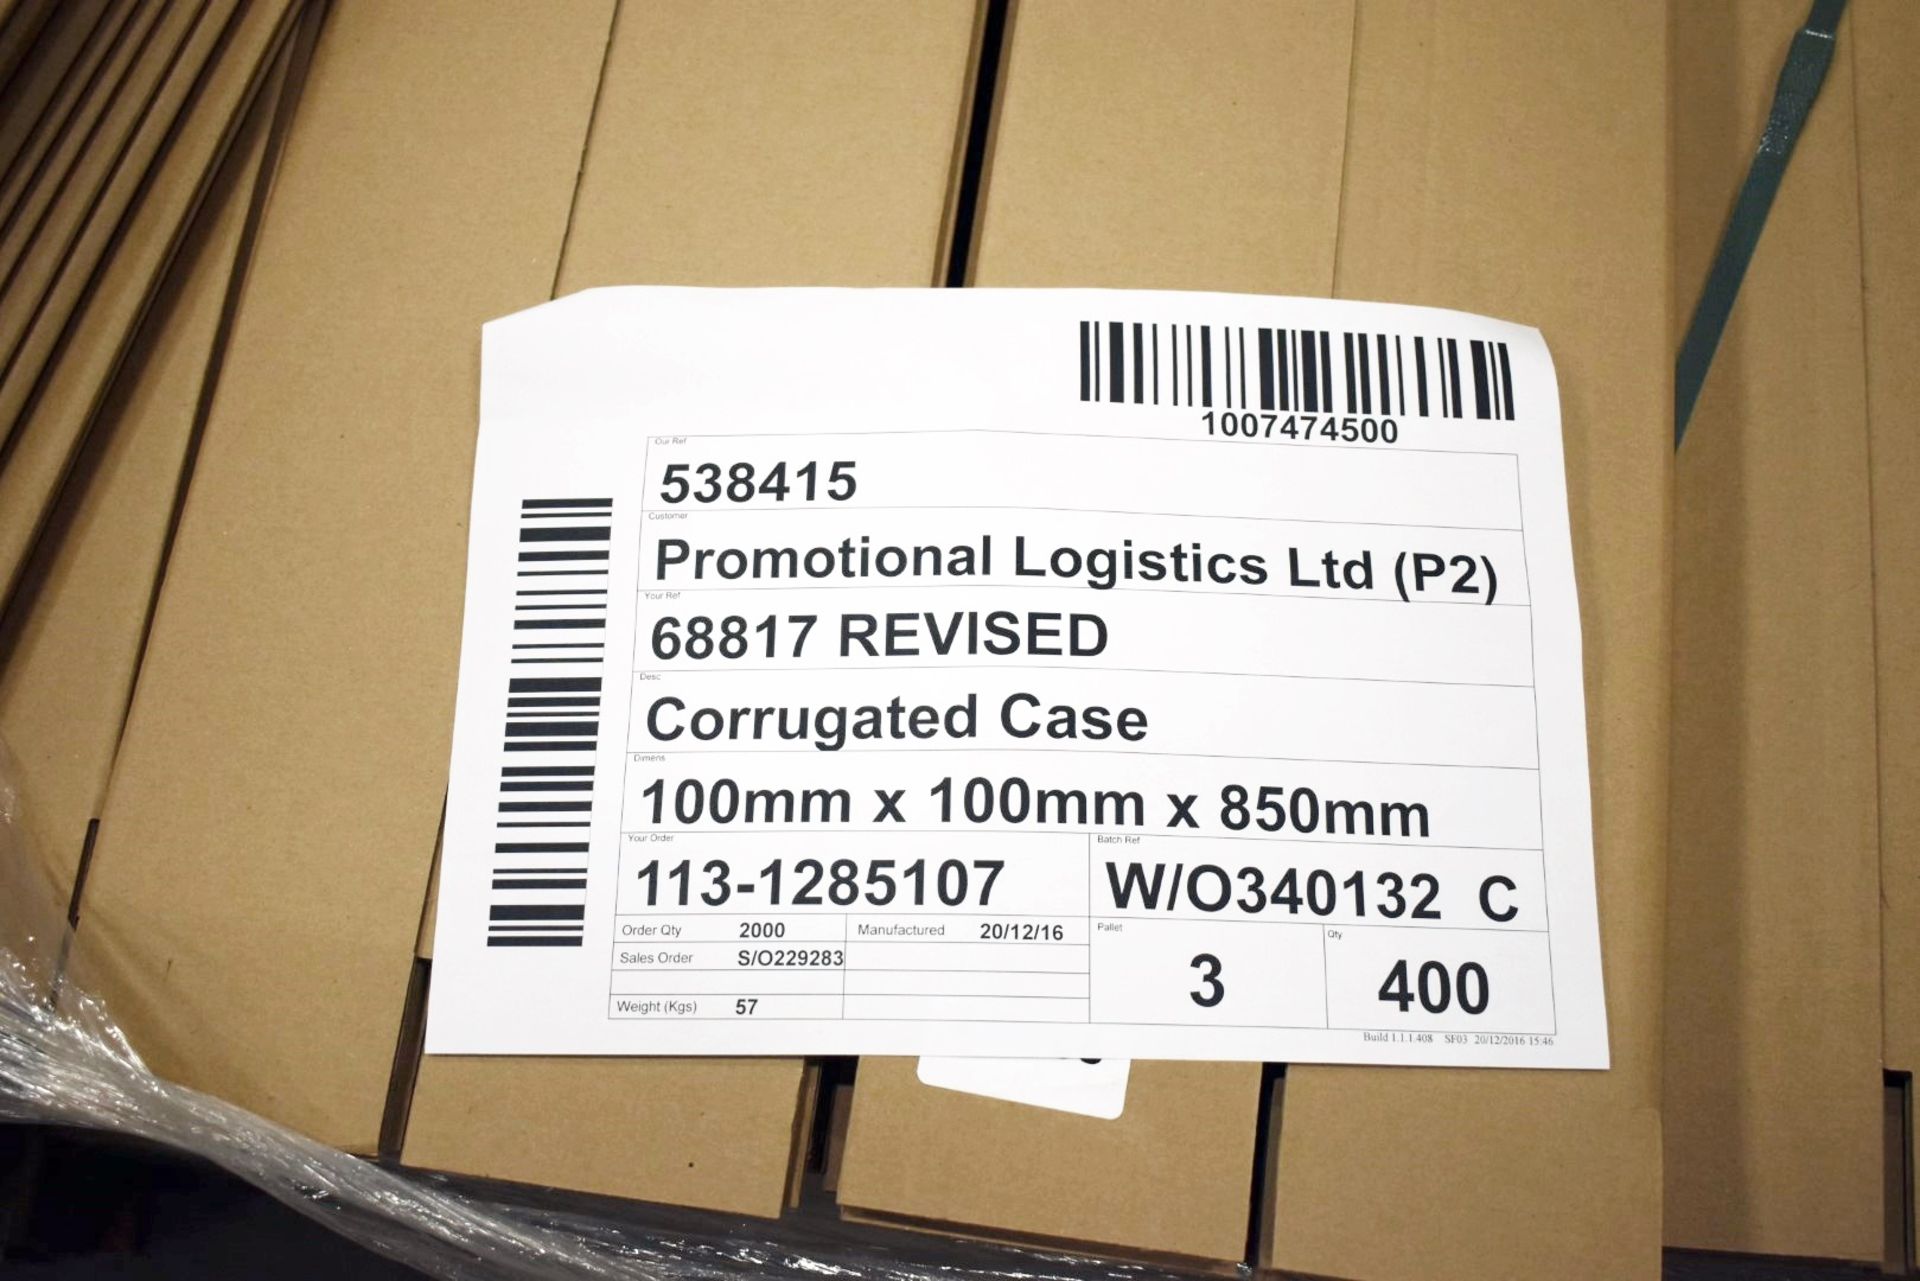 360 x Corrugated Cardboard Boxes - 100x100x850mm - Supplied as New in Bundles of 10 - Ref TD266 - - Image 2 of 2